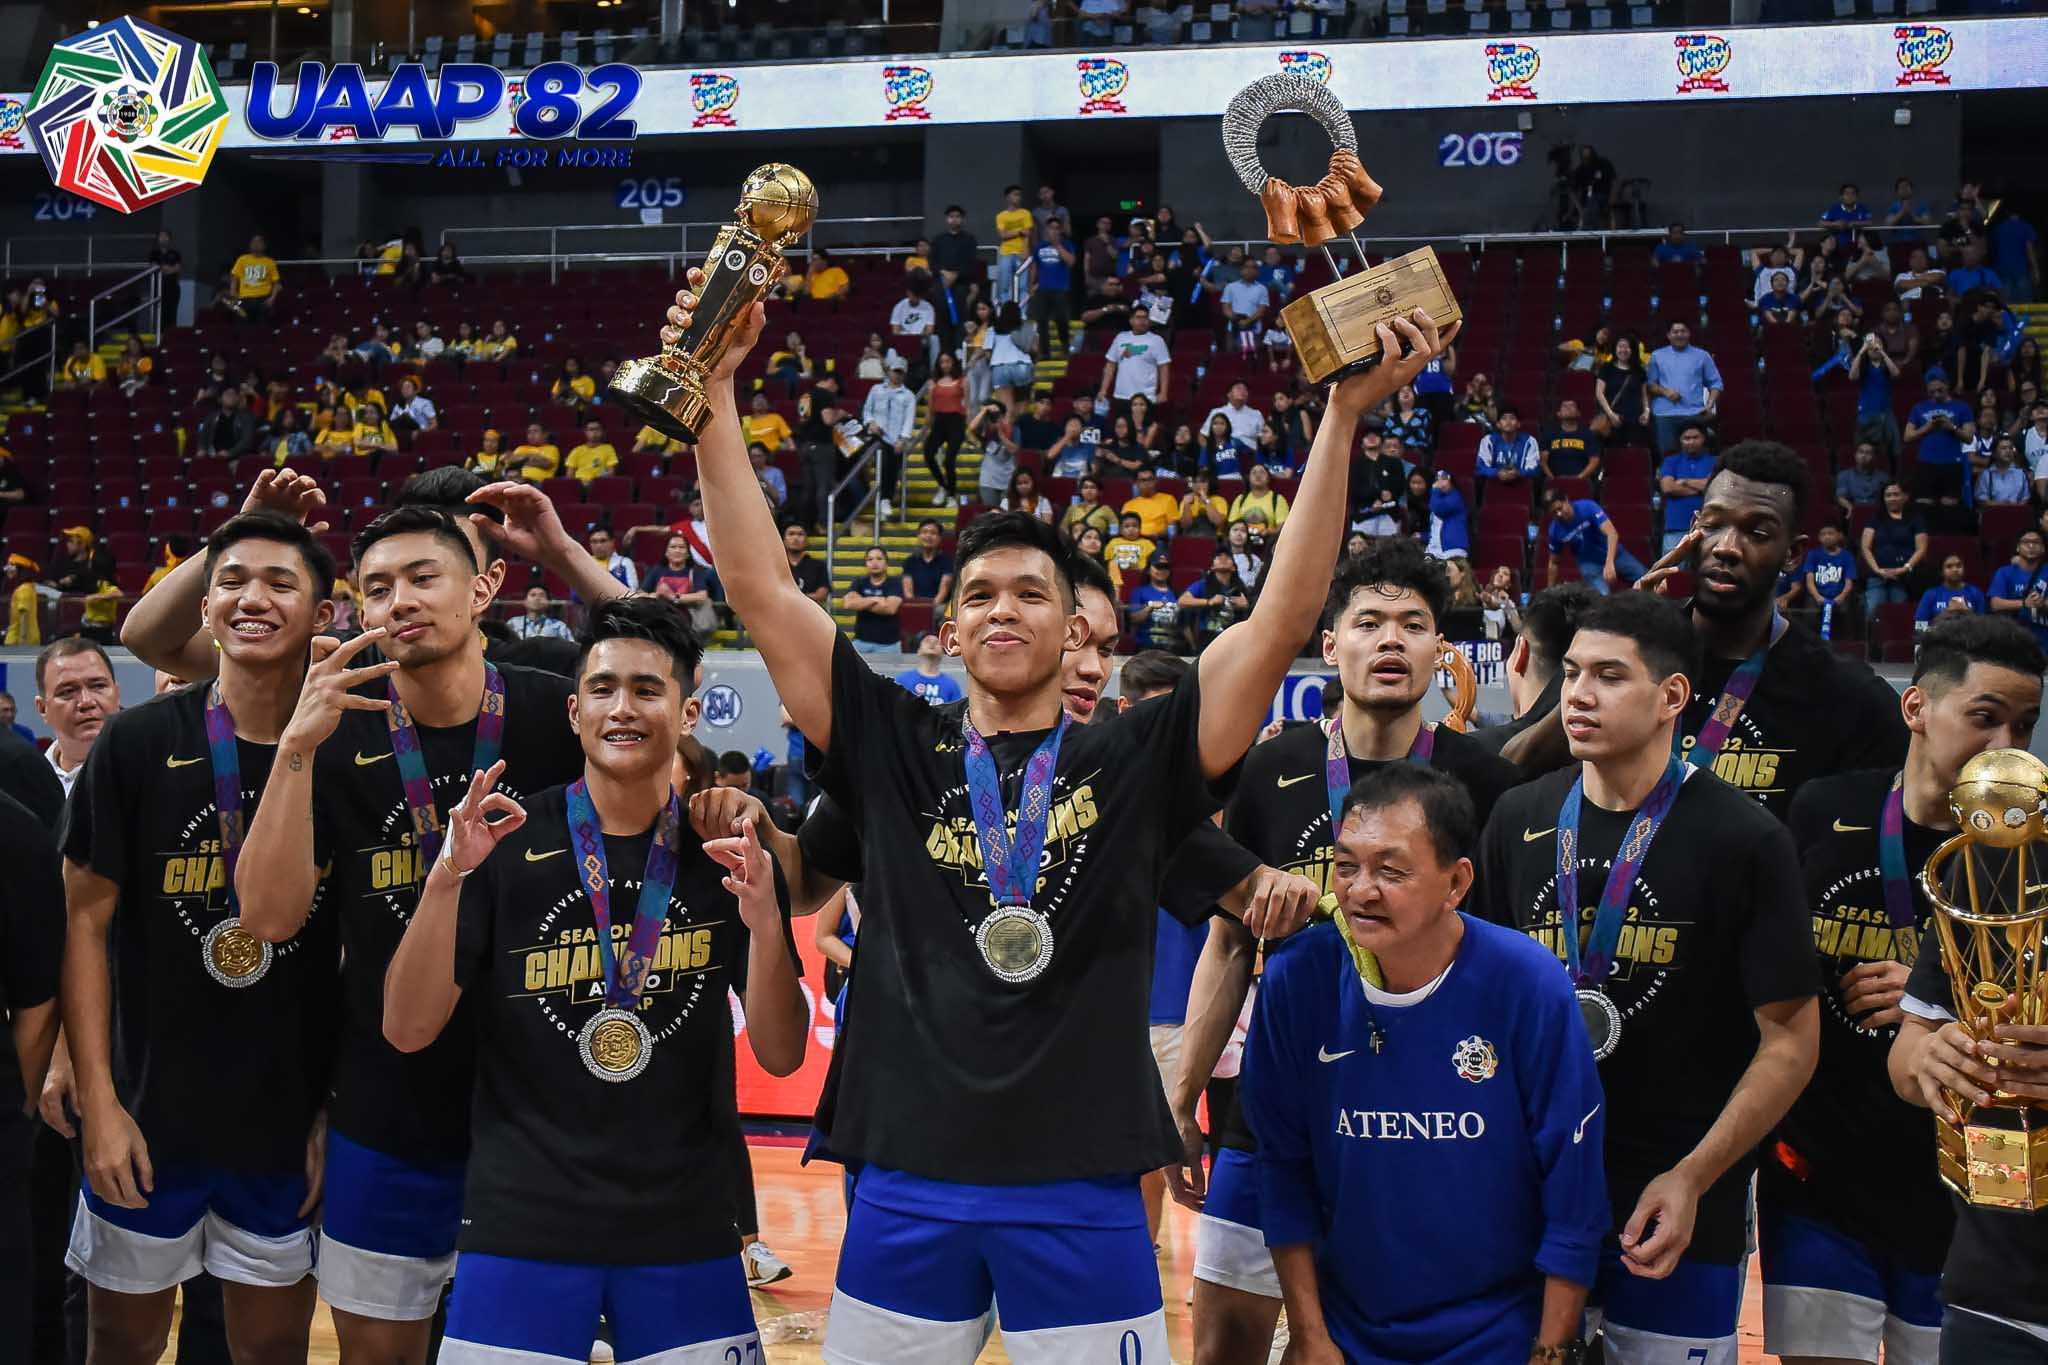 The Ateneo team sharing the glory after winning the Season 82 championships